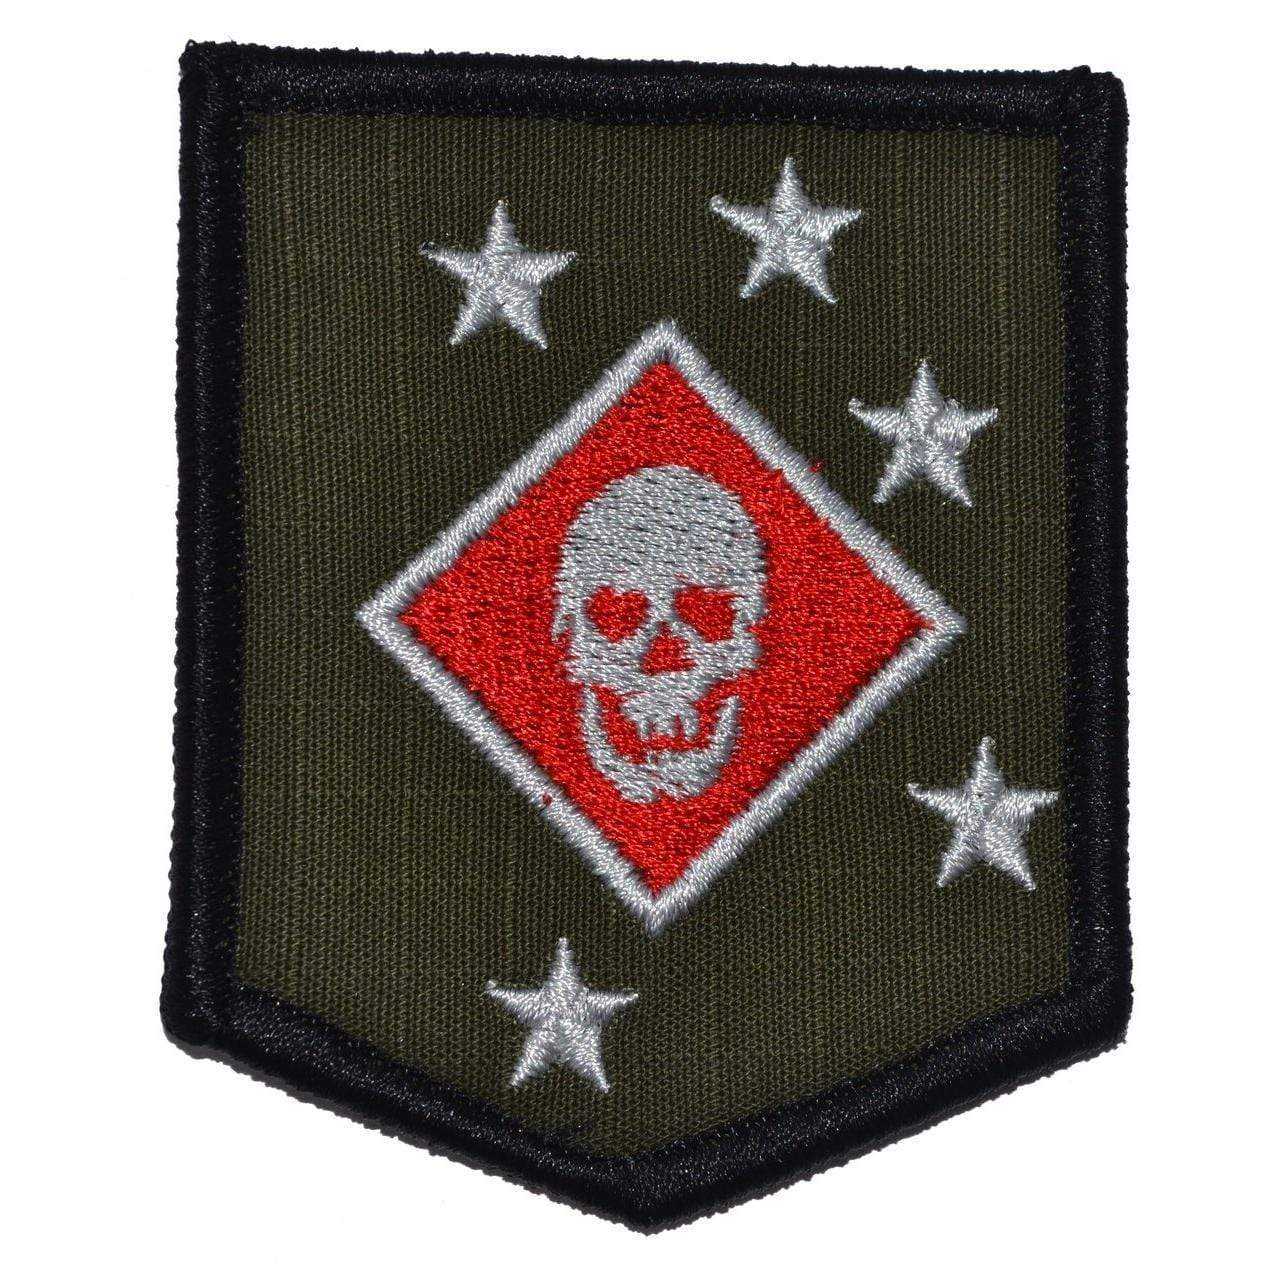 Tactical Gear Junkie Patches Olive Drab Marine Raider Battalion Thick Jaw Patch MarSOC - Shield Patch